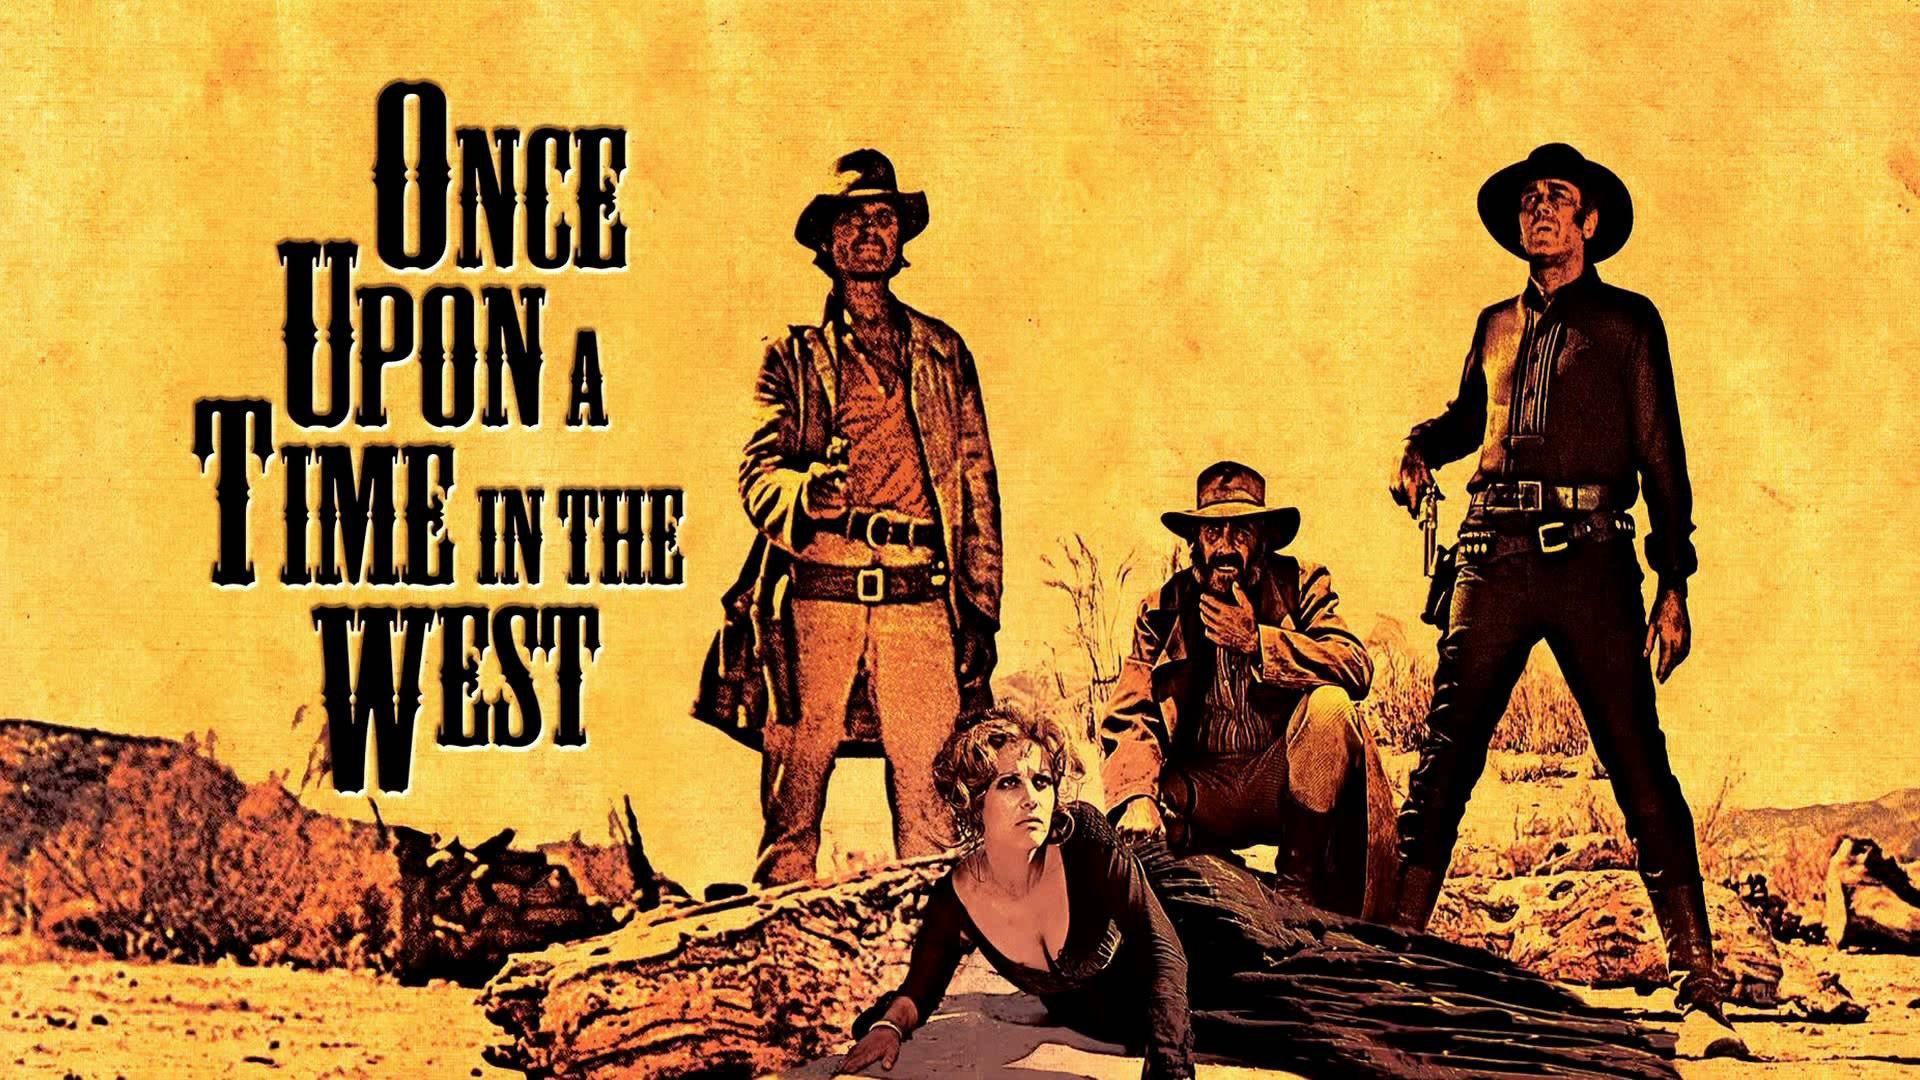 Miền viễn Tây ngày ấy - Once Upon a Time in the West (1968)